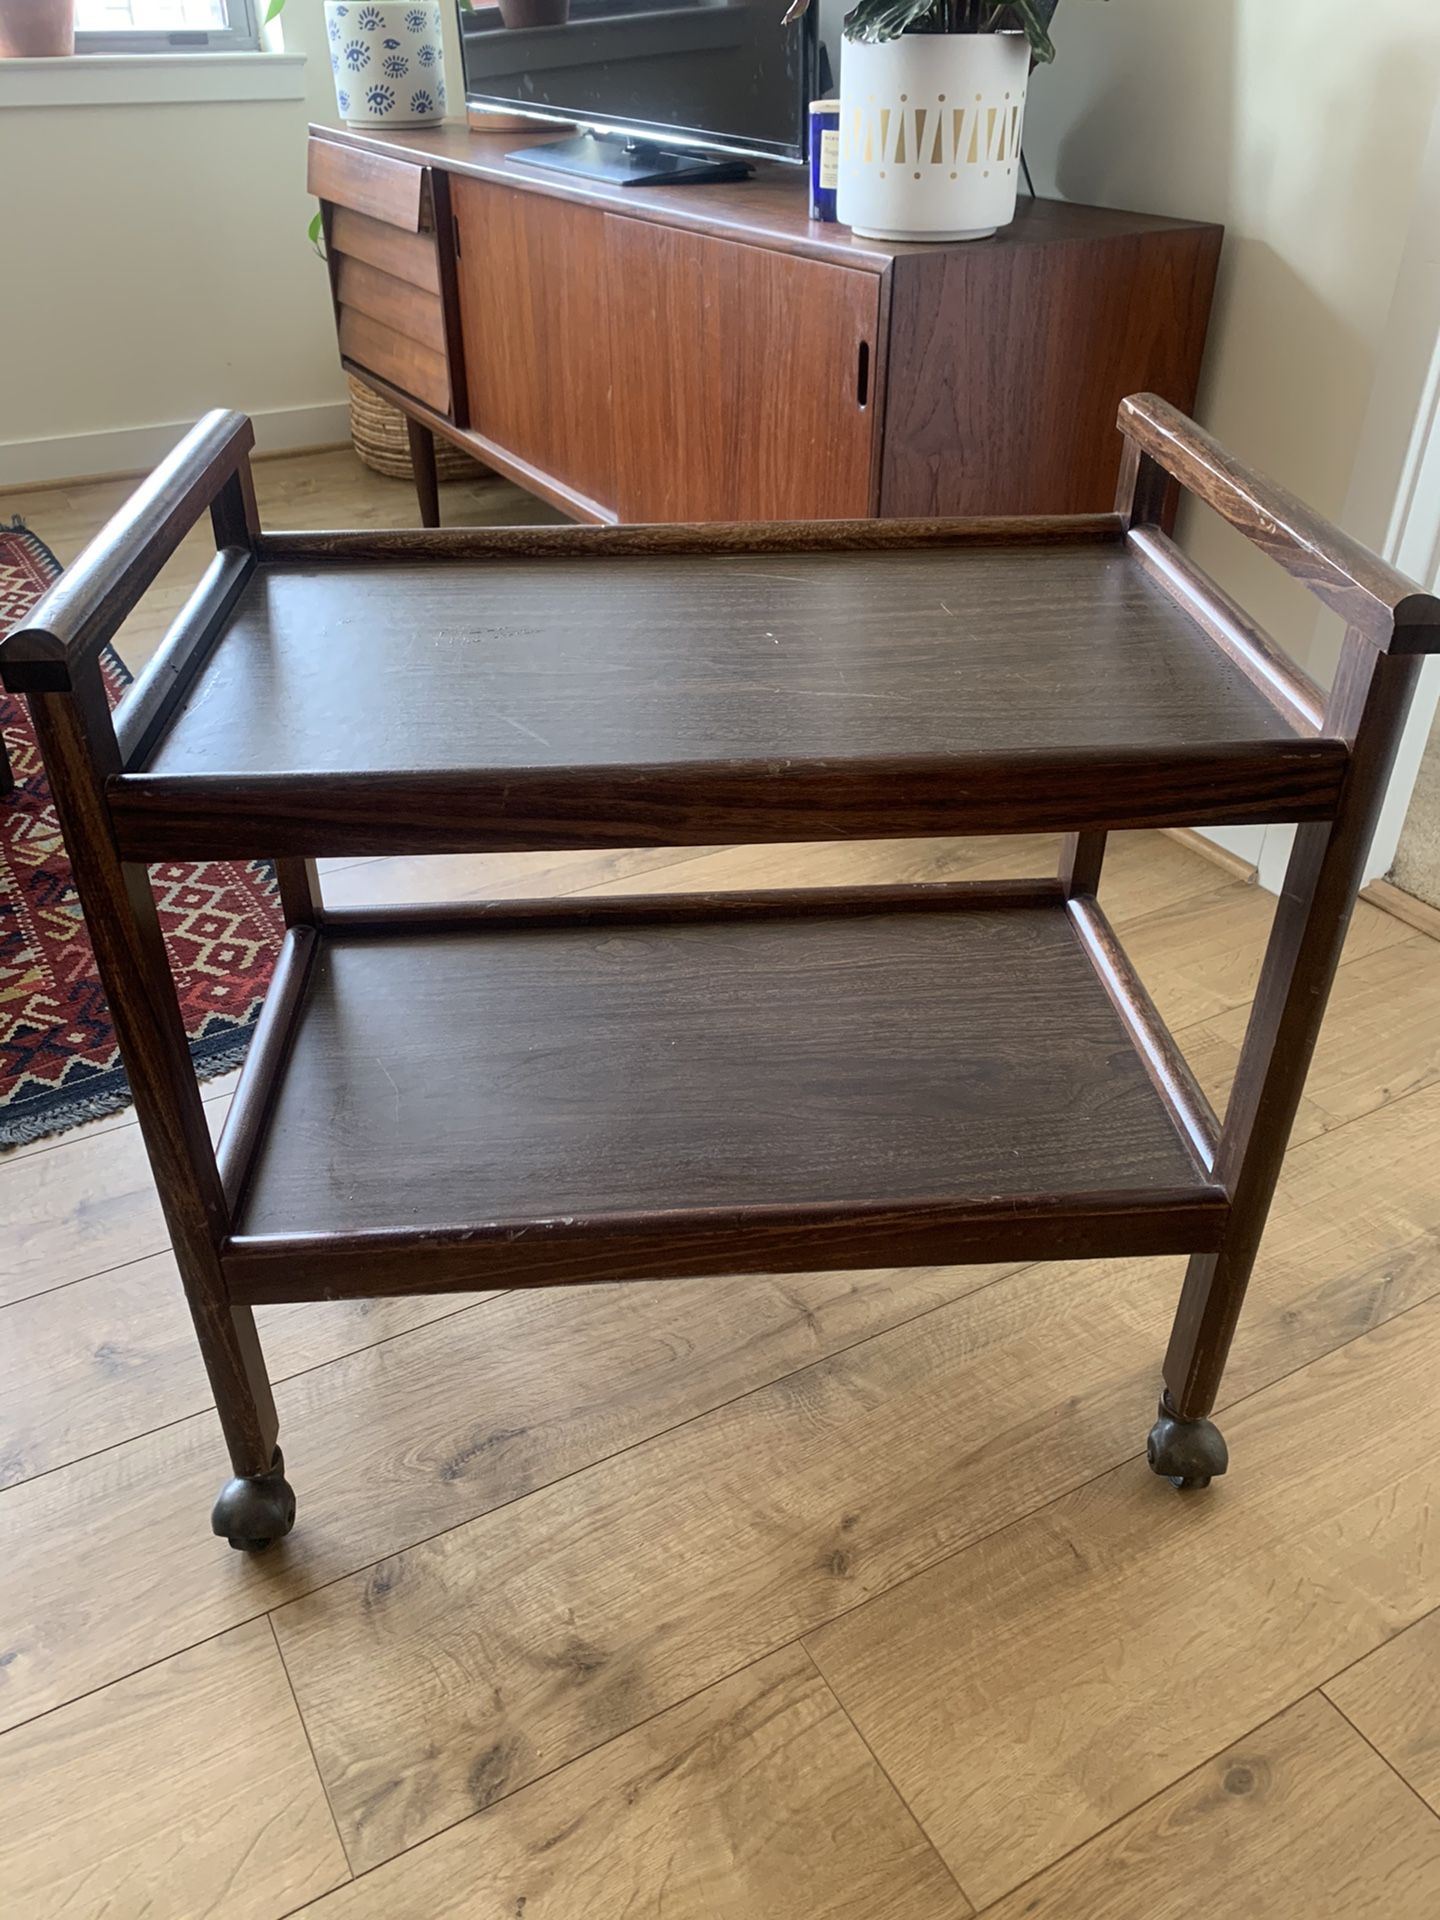 Midcentury bar or tea cart. I used as a bookcase. Lightweight and is in fair condition but super cute.